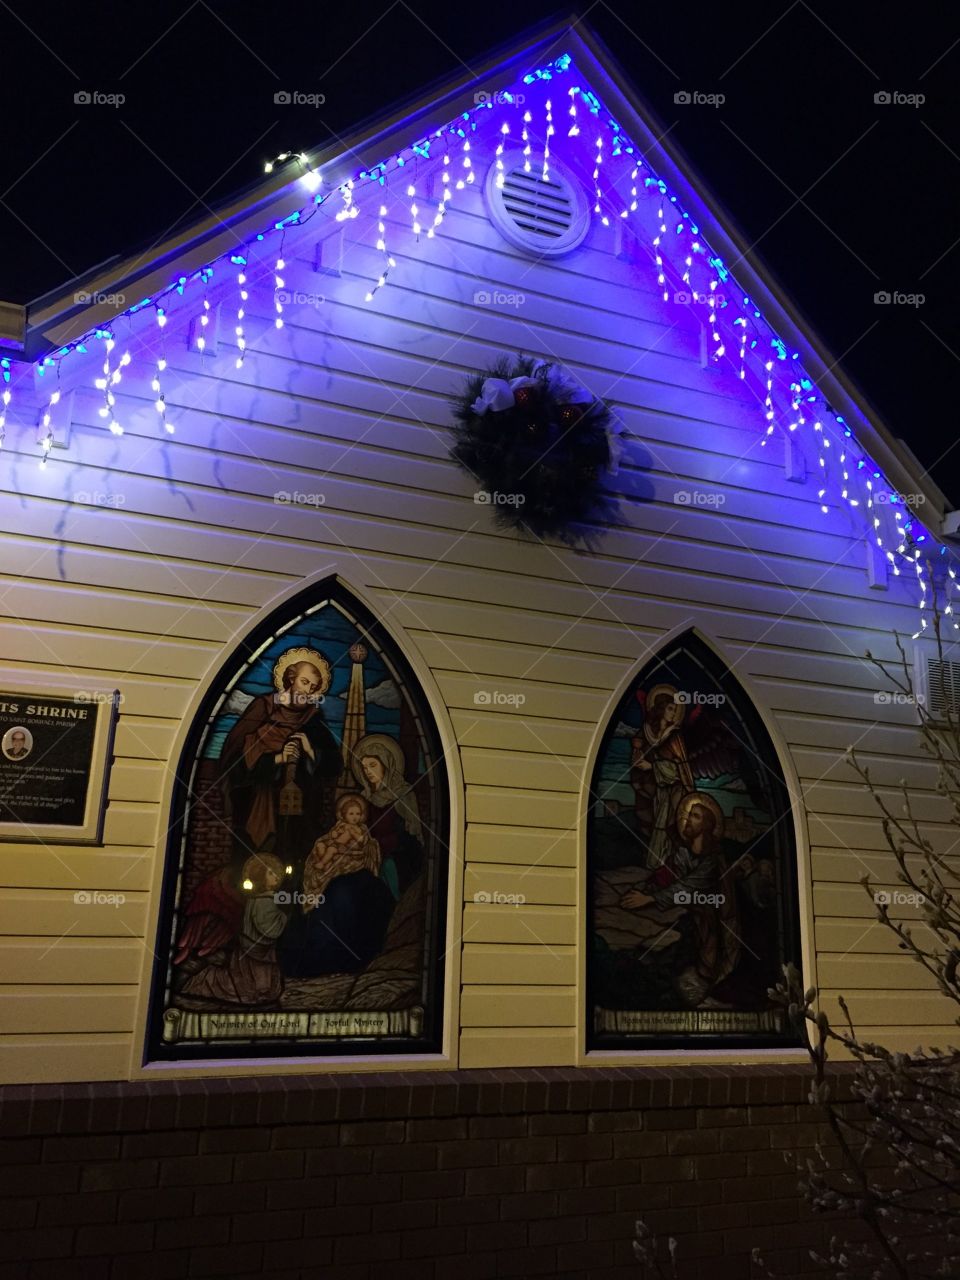 The Catholic grotto in my town lit with Christmas lights